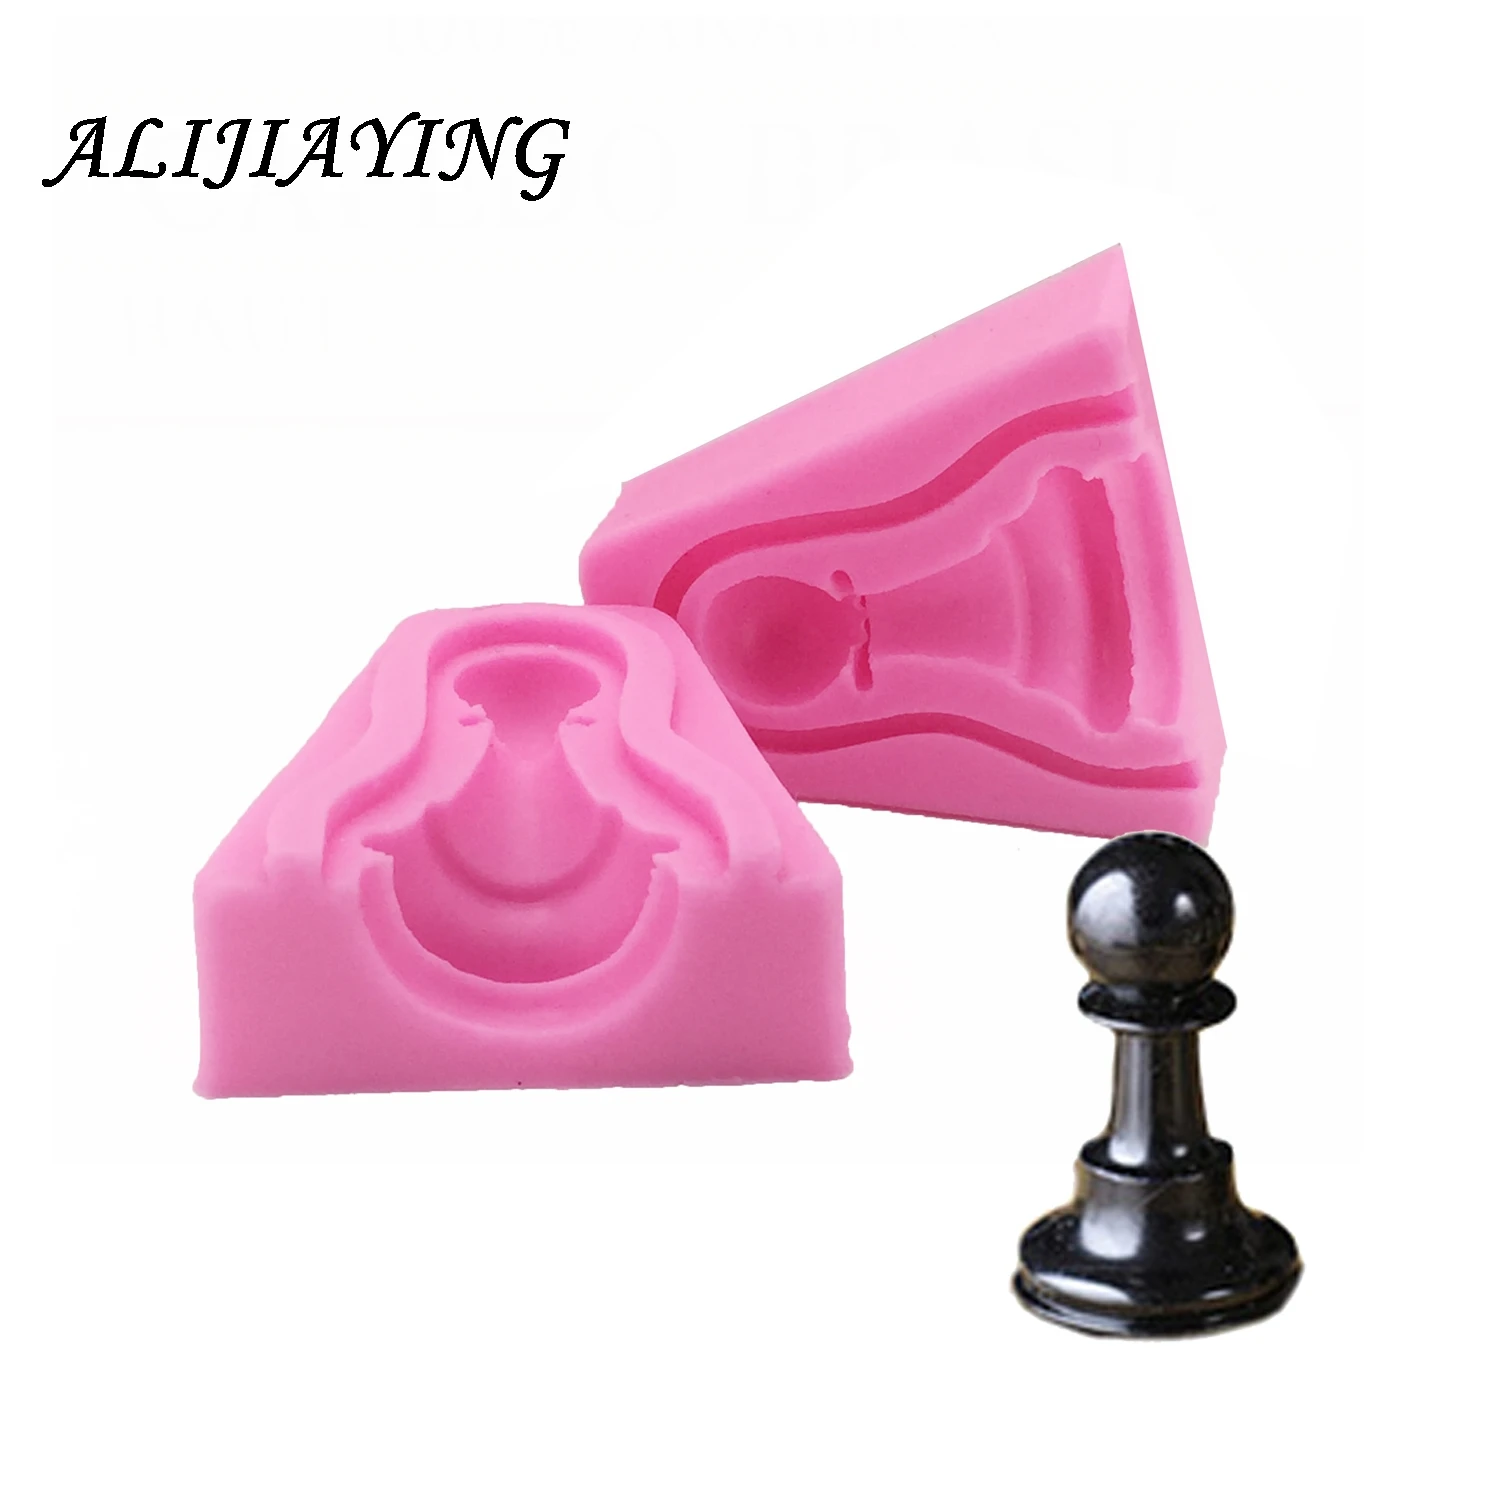 

3D International Chess Form Pastry Chocolate Sugar Soap Fondant Silicone Molds Kitchen Baking Cake Decorating Tools D0762